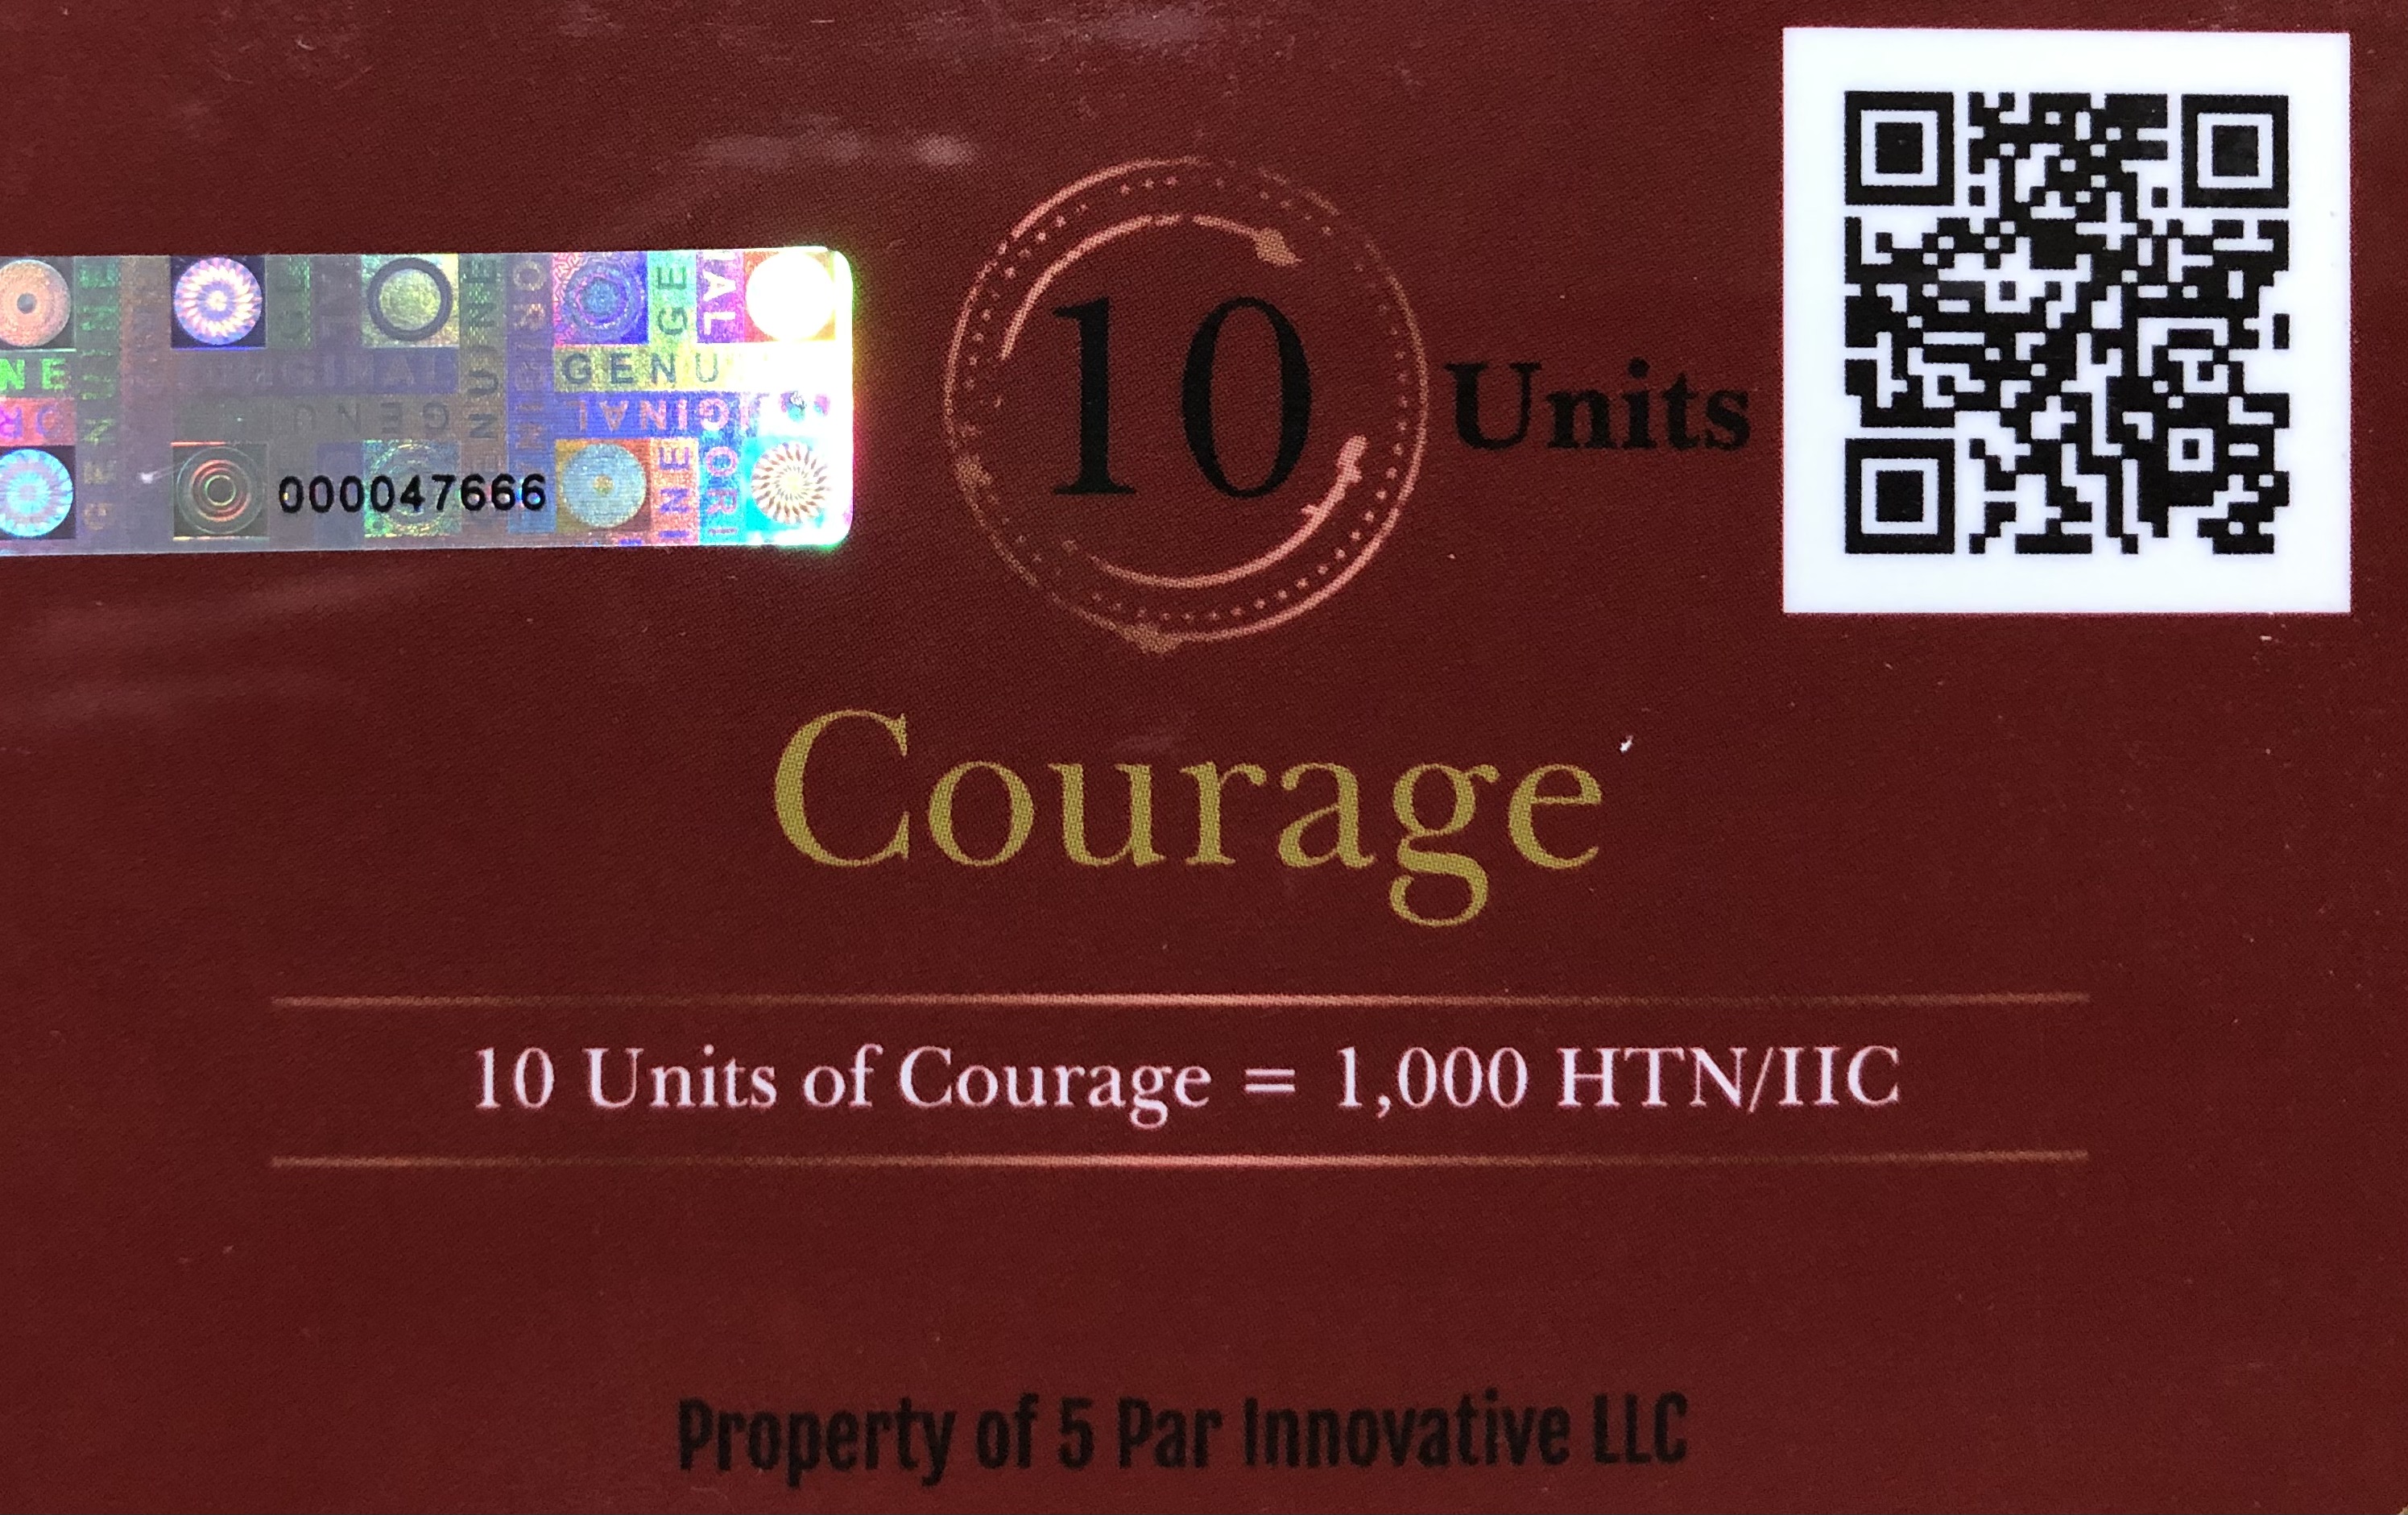 10 Units of Courage